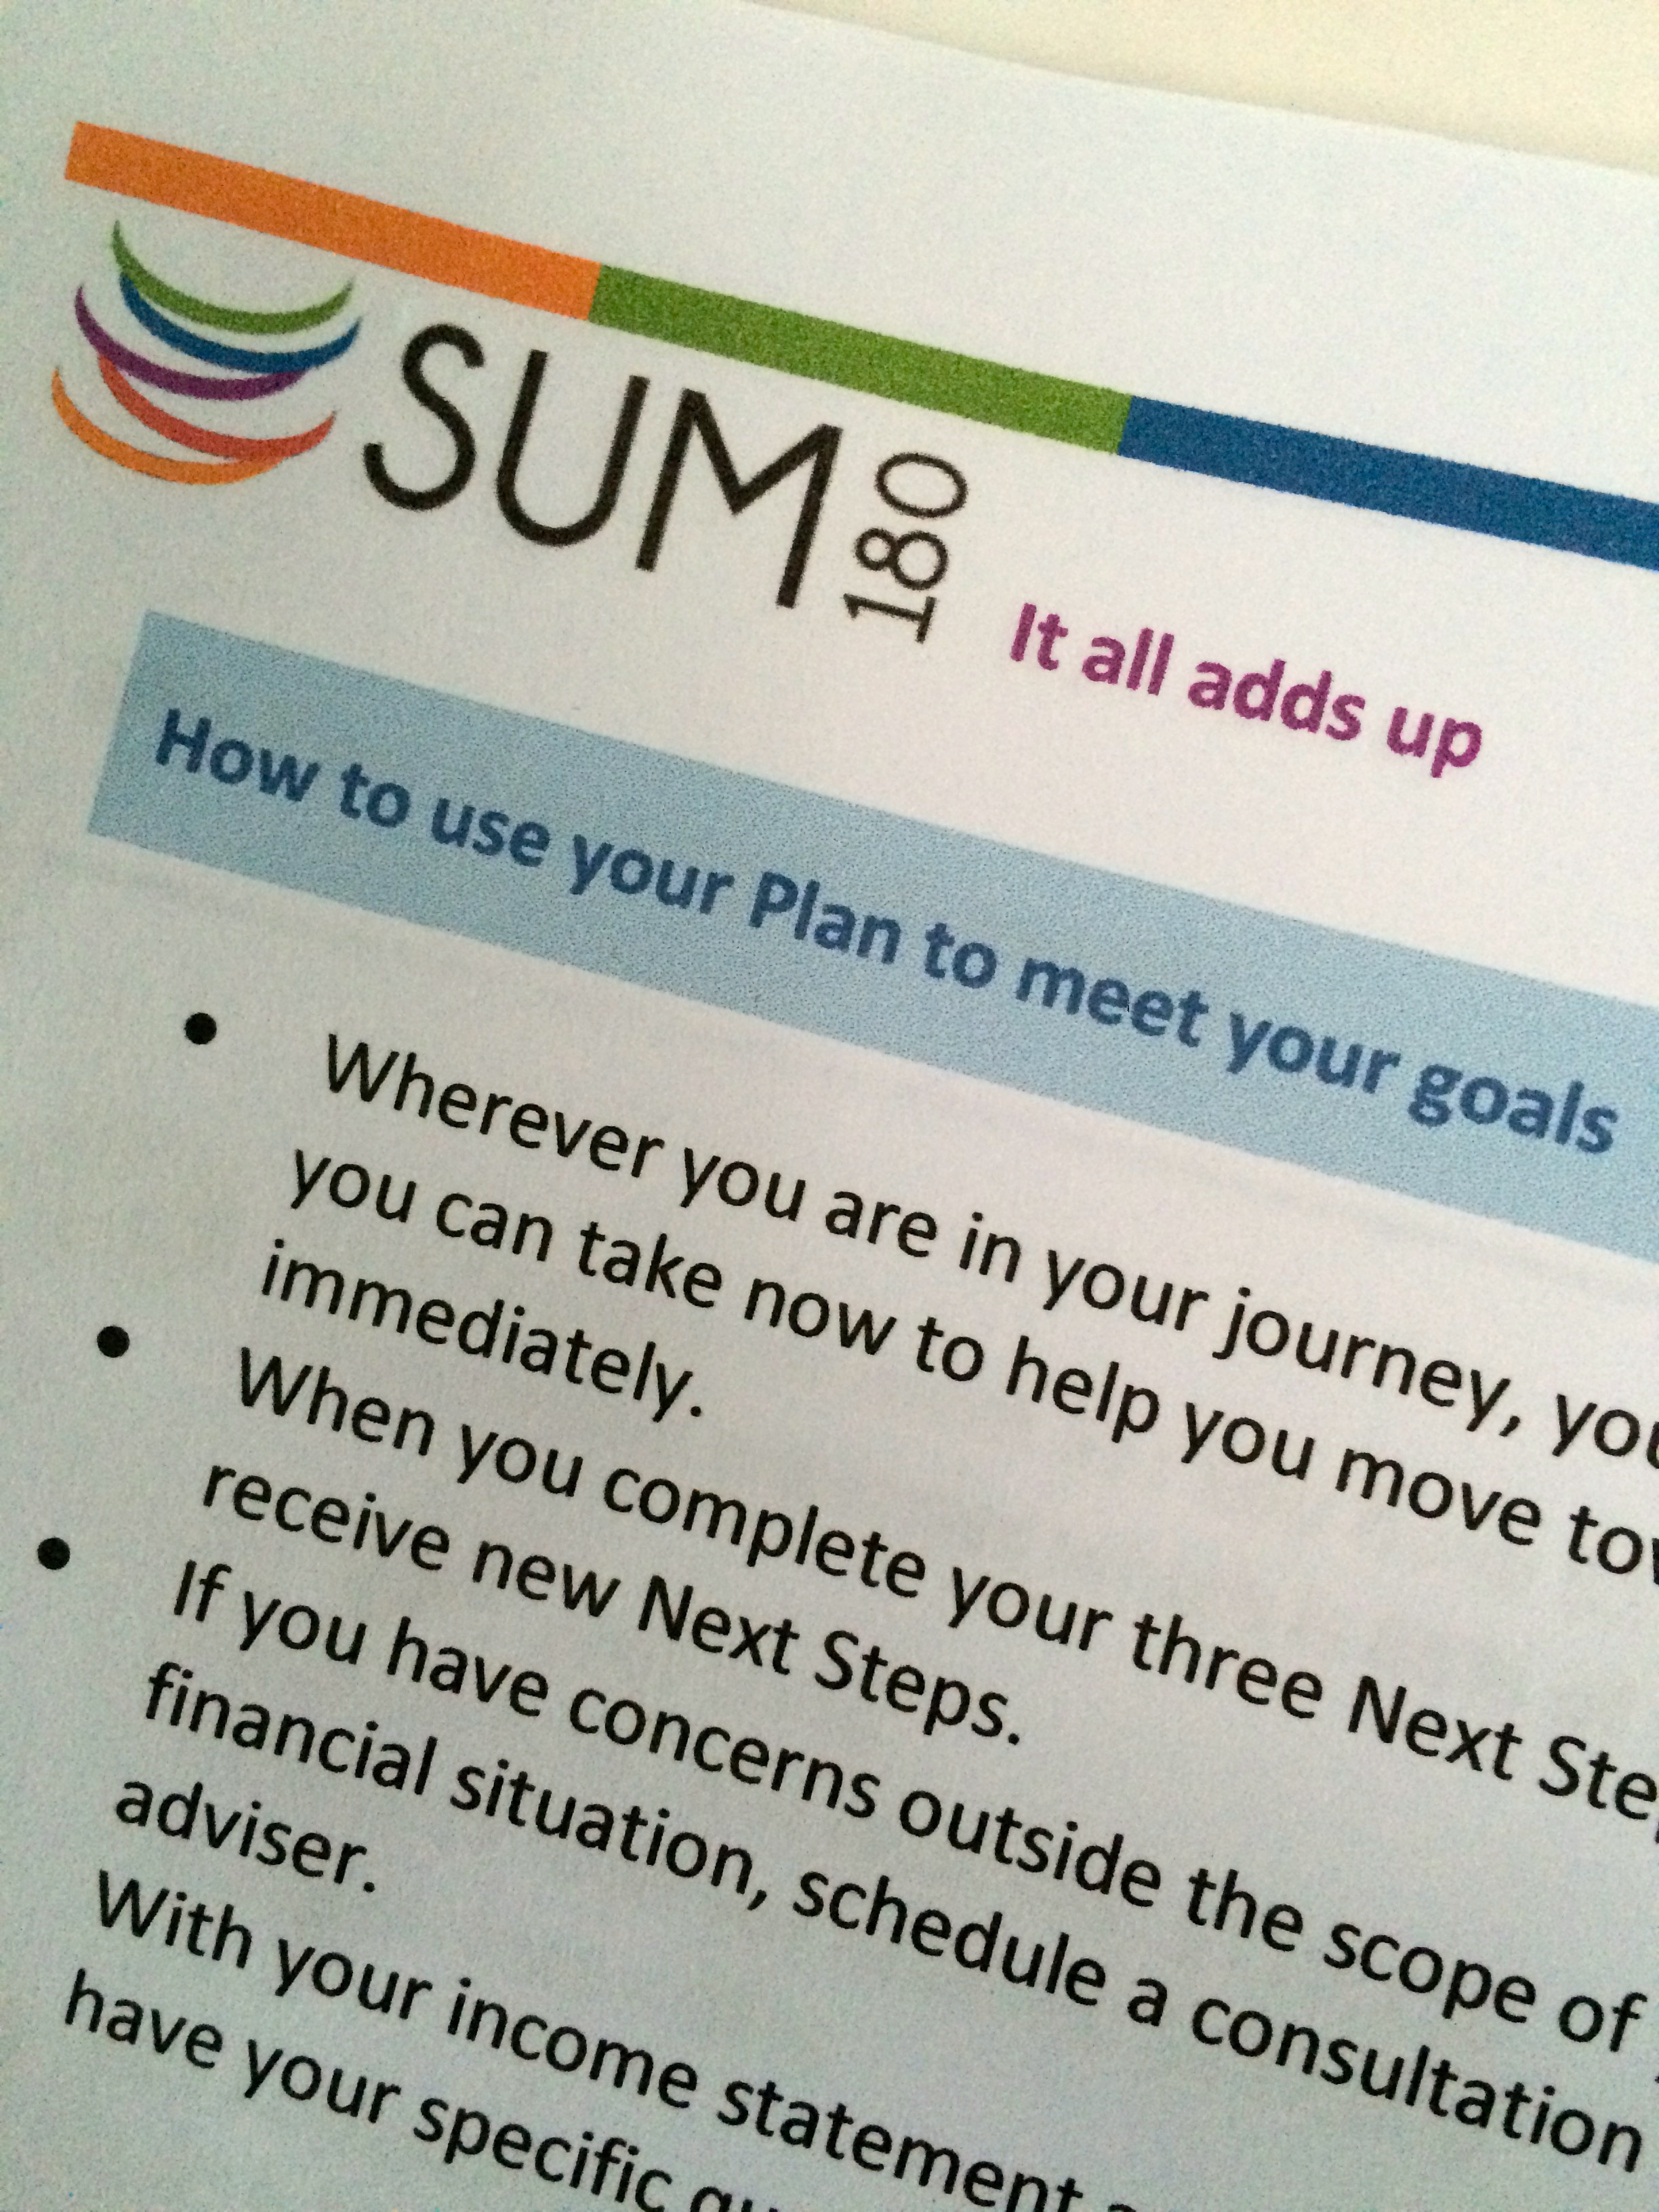 Financial Planning for a Better Future with SUM180